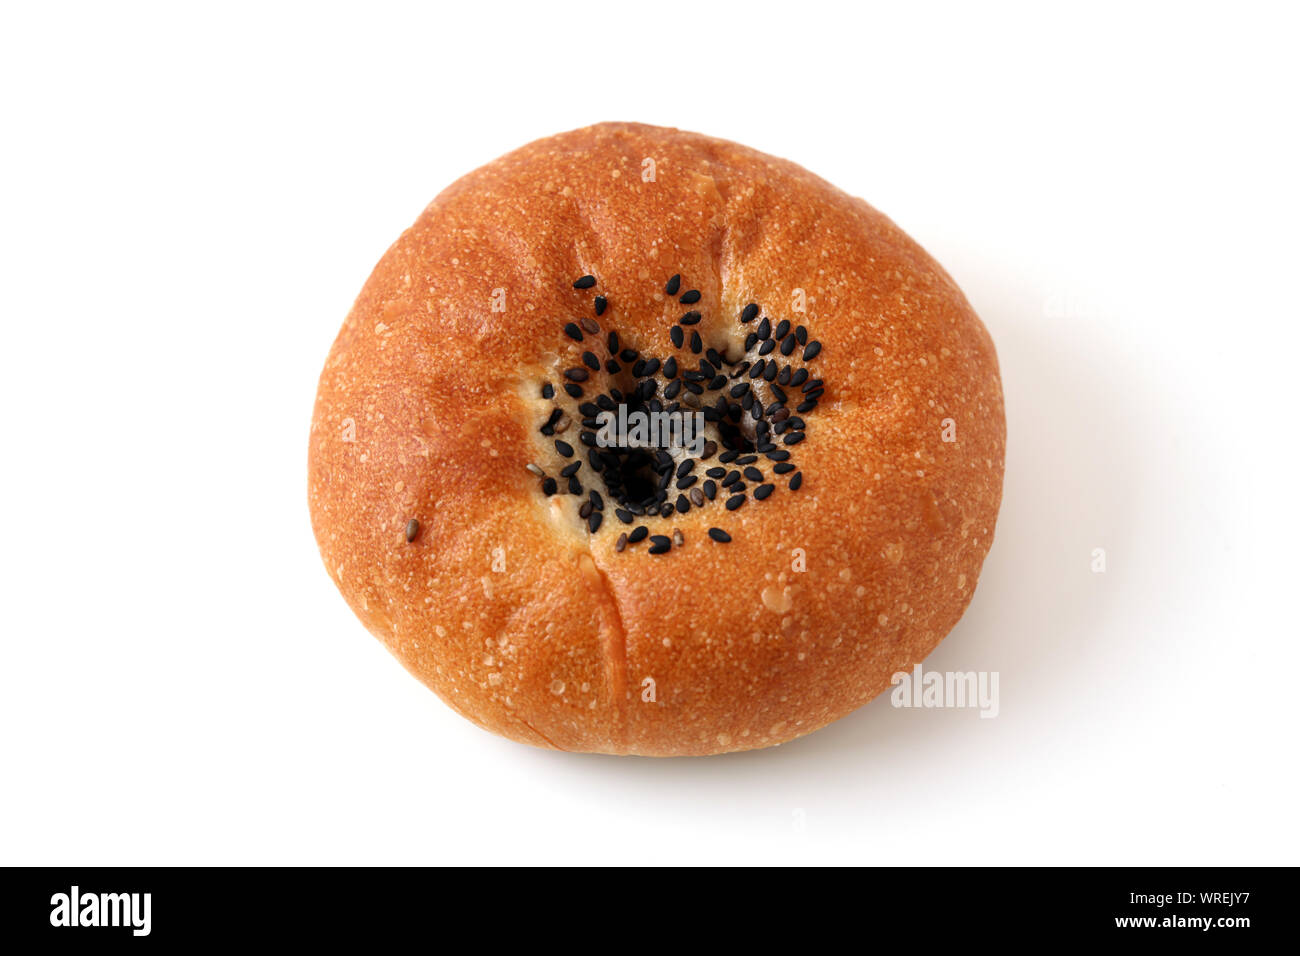 https://c8.alamy.com/comp/WREJY7/round-bread-sweet-red-bean-bun-closeup-isolated-on-white-background-WREJY7.jpg